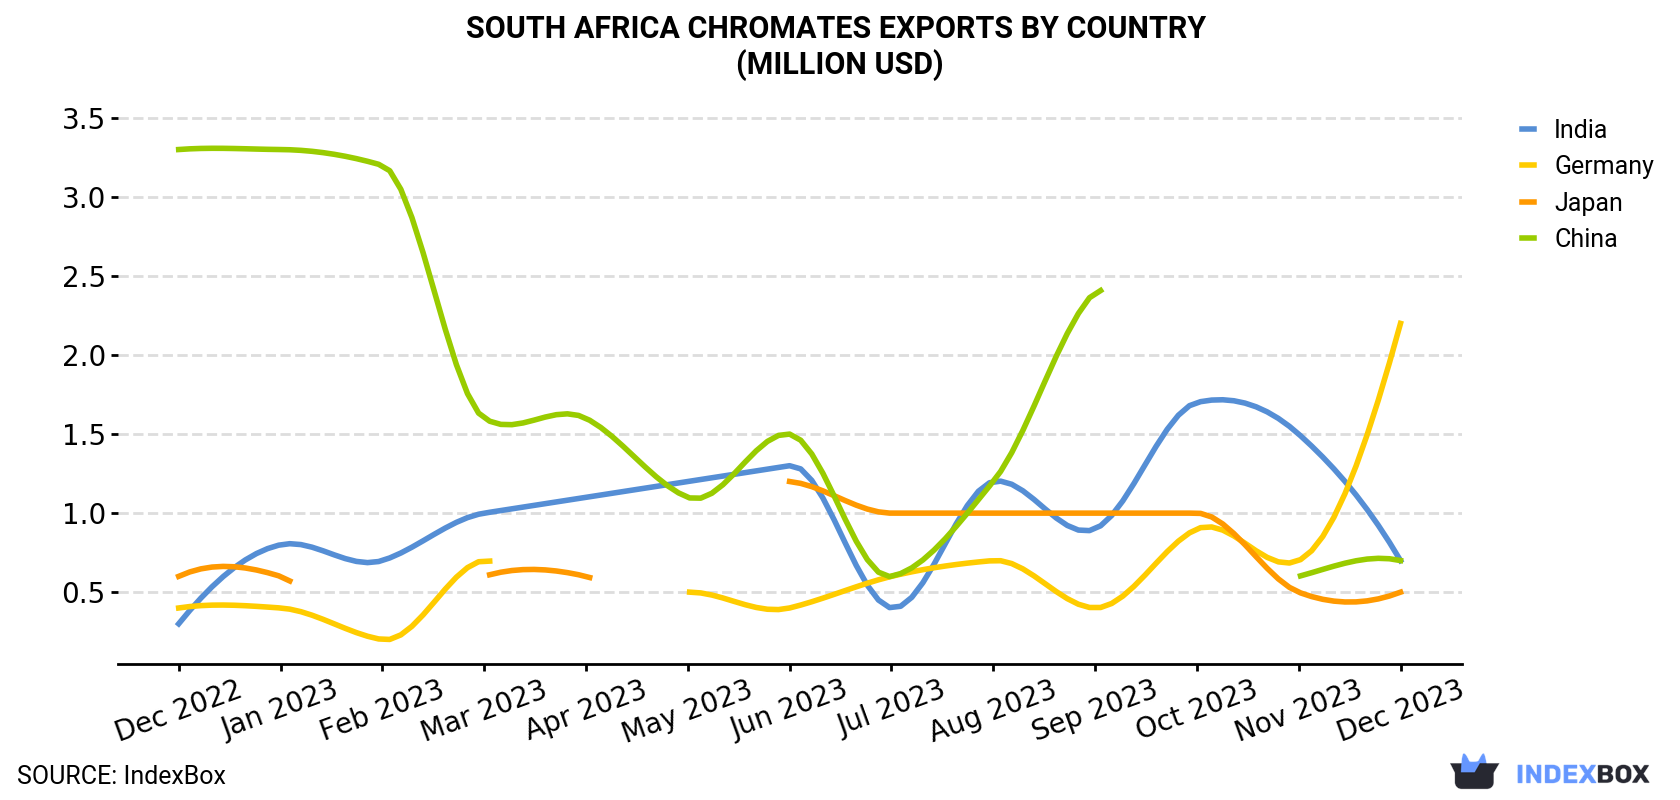 South Africa Chromates Exports By Country (Million USD)